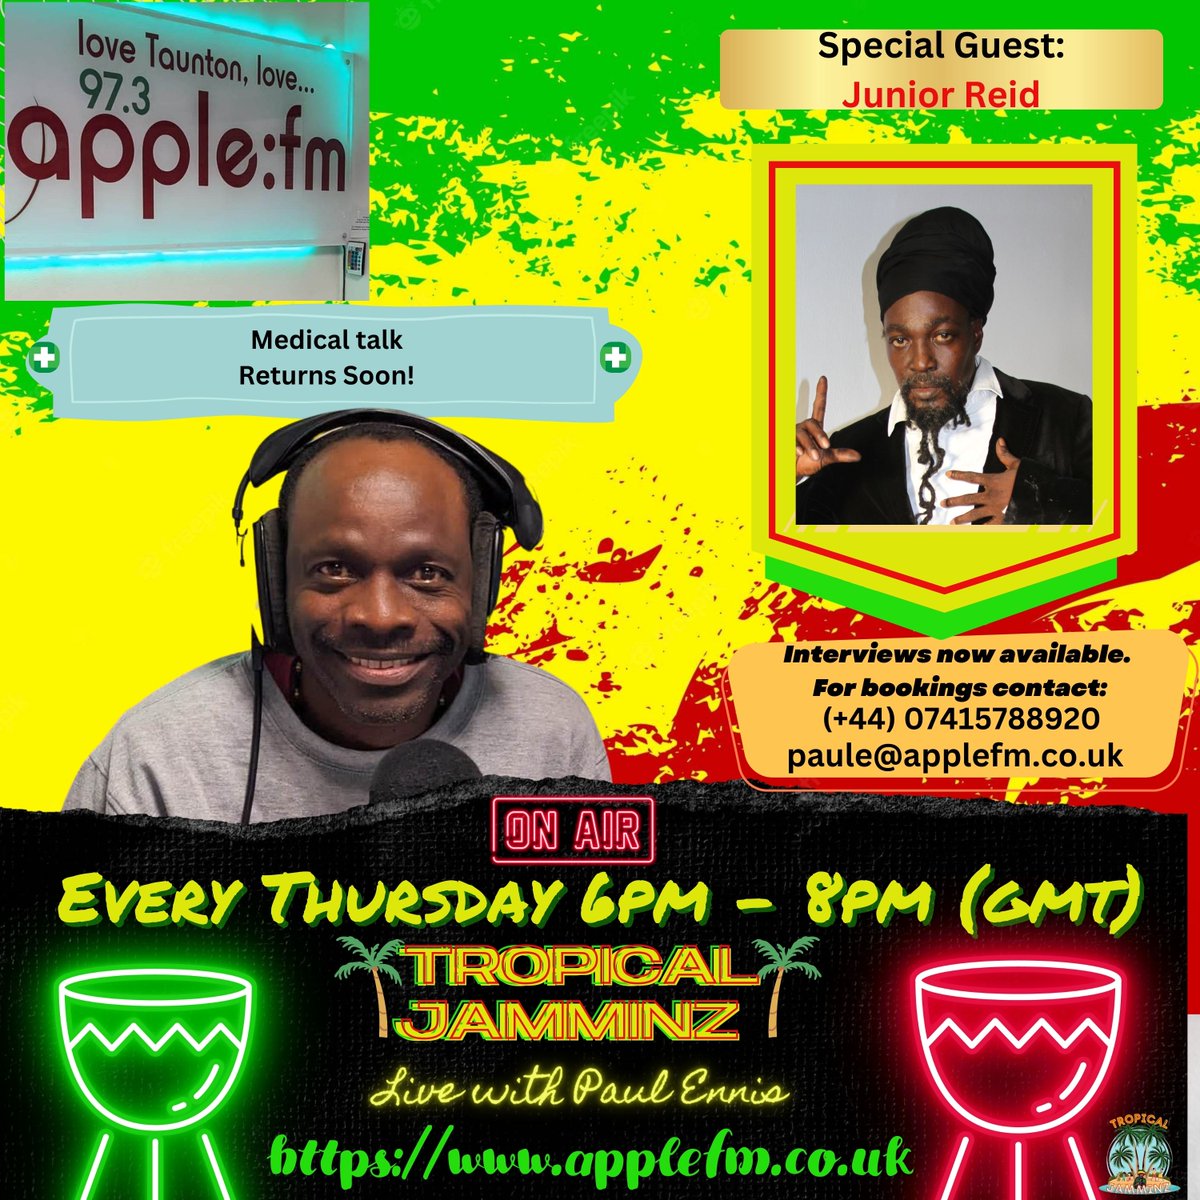 applefm.co.uk
Please come and tune in and support. Thursdays from 6pm catch this weeks Special Guest @1JUNIORREID 
Live from 6pm (gmt) For promotional packages
Get In touch with either Mikey d promo page   or
Paule@applefm.co.uk
live from Somerset,uk #applefm #Reggae